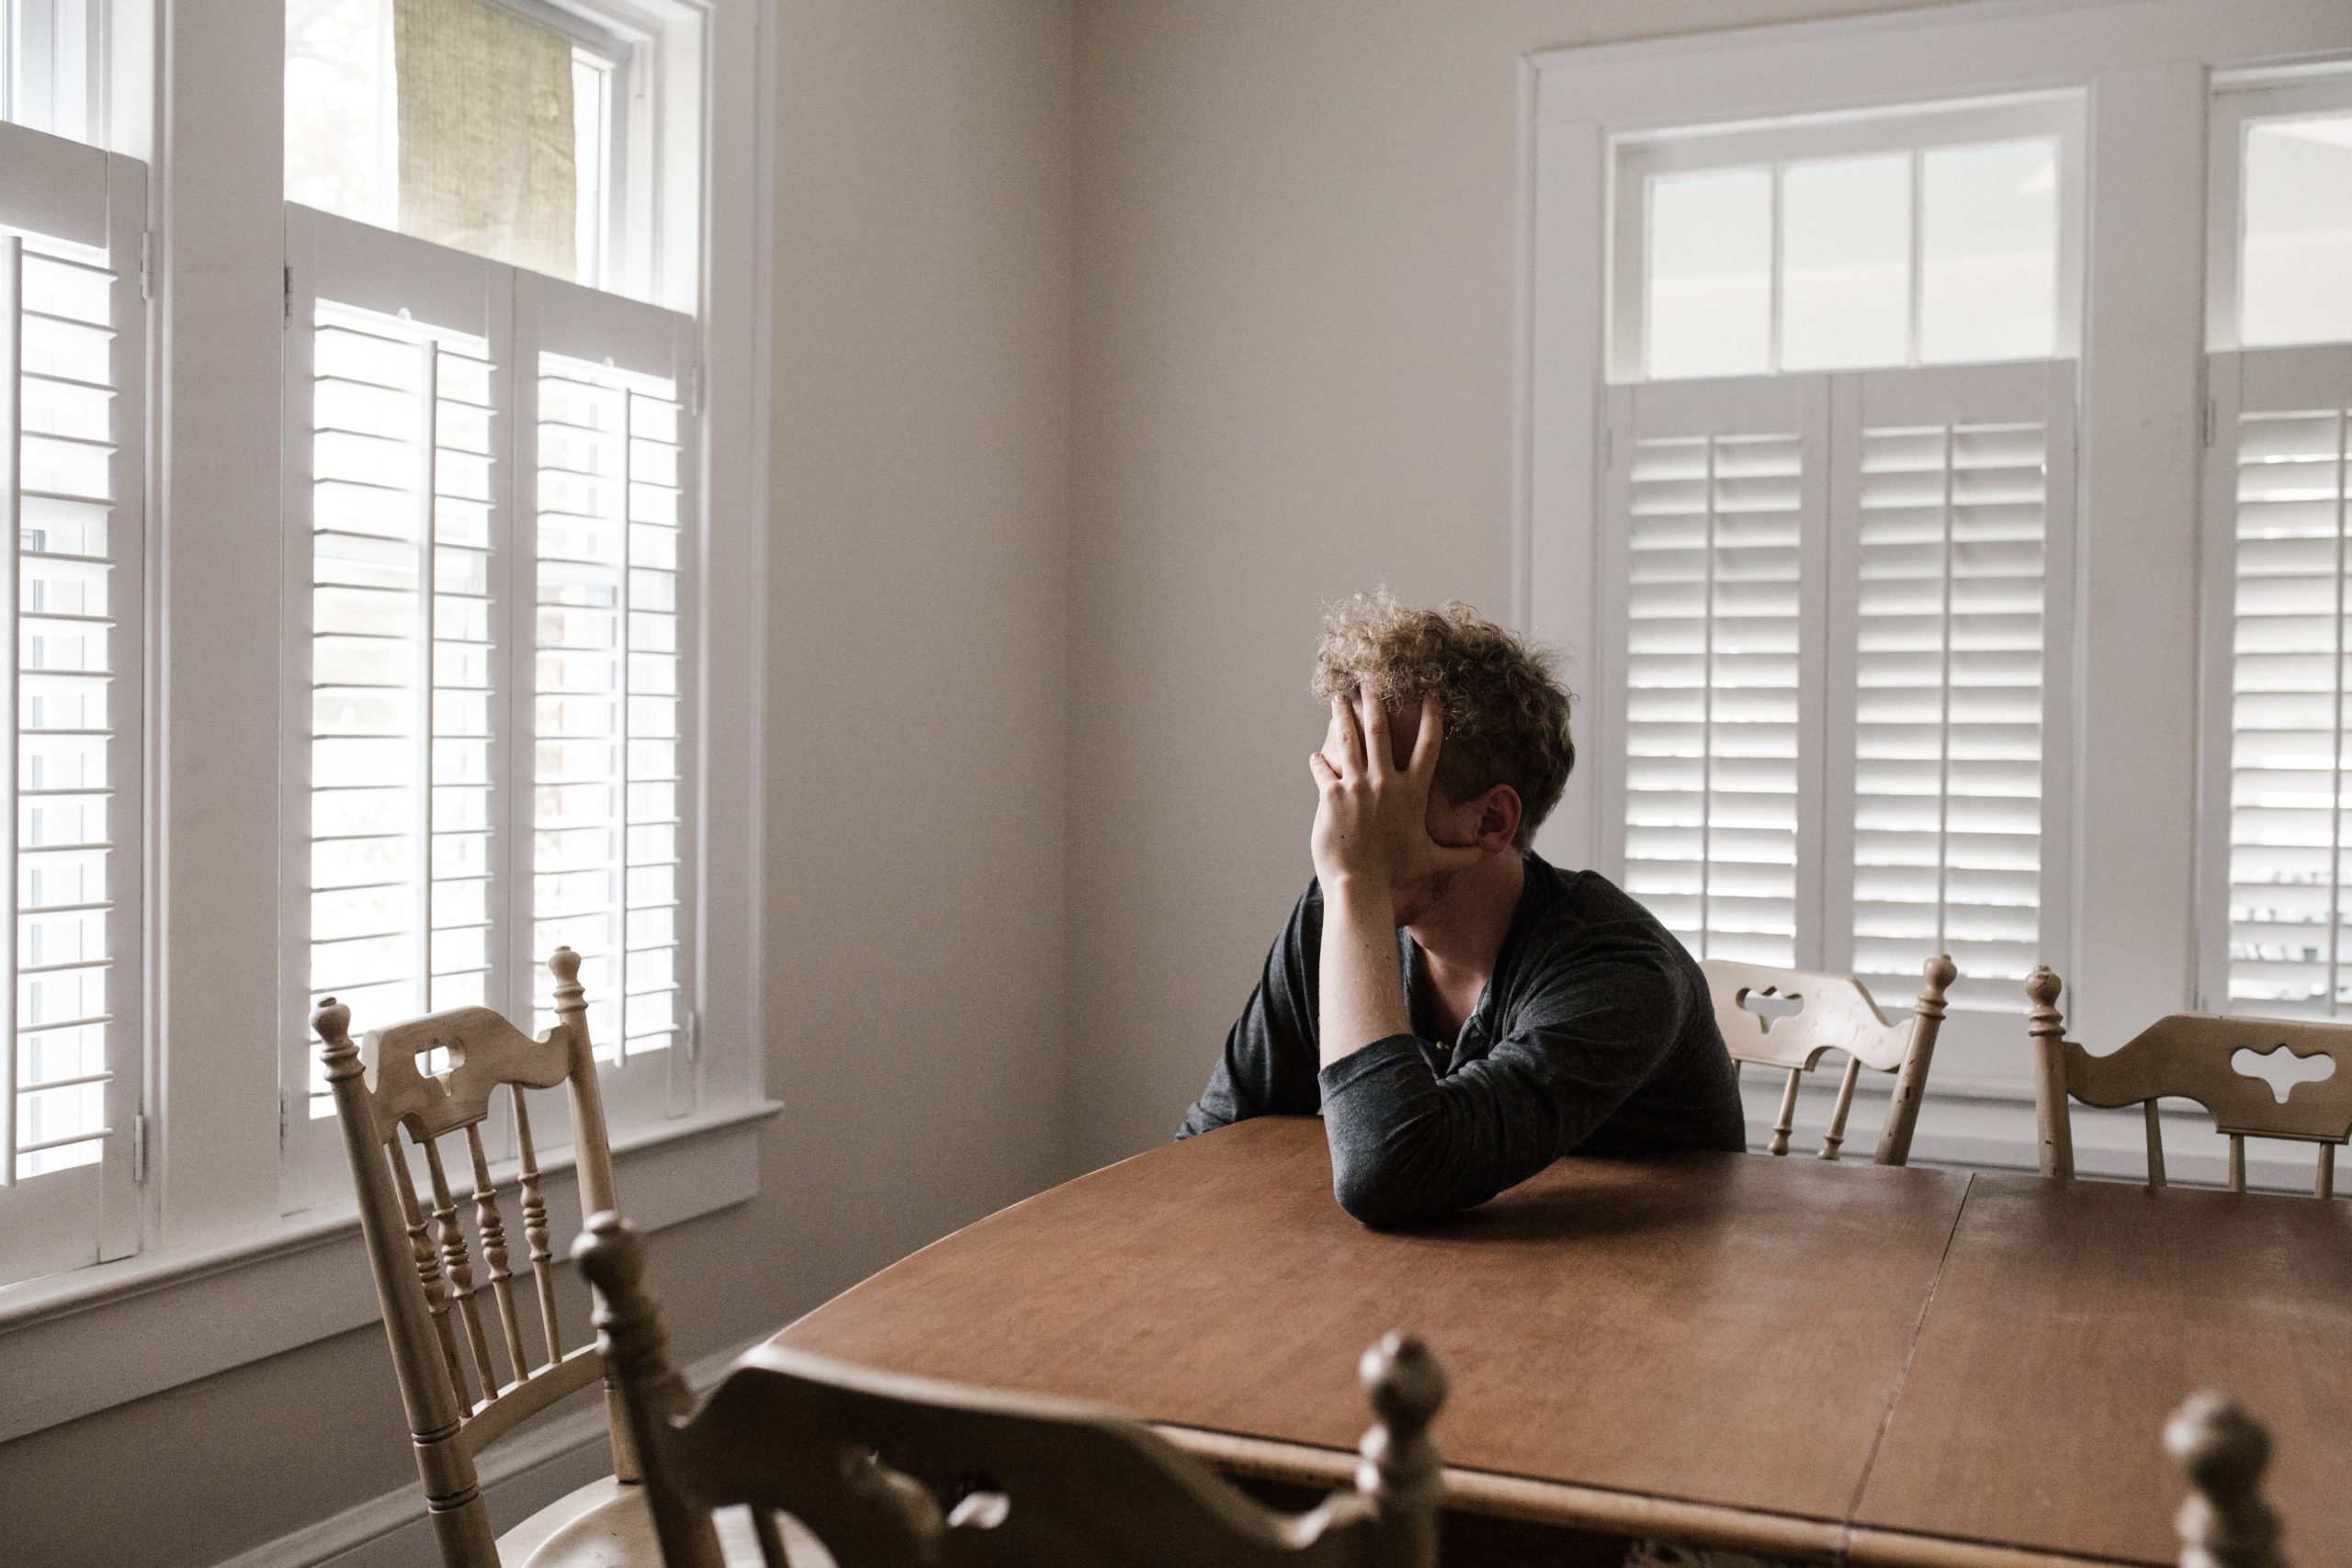 Man sitting at a table at his house with his head in his hands looking out the window